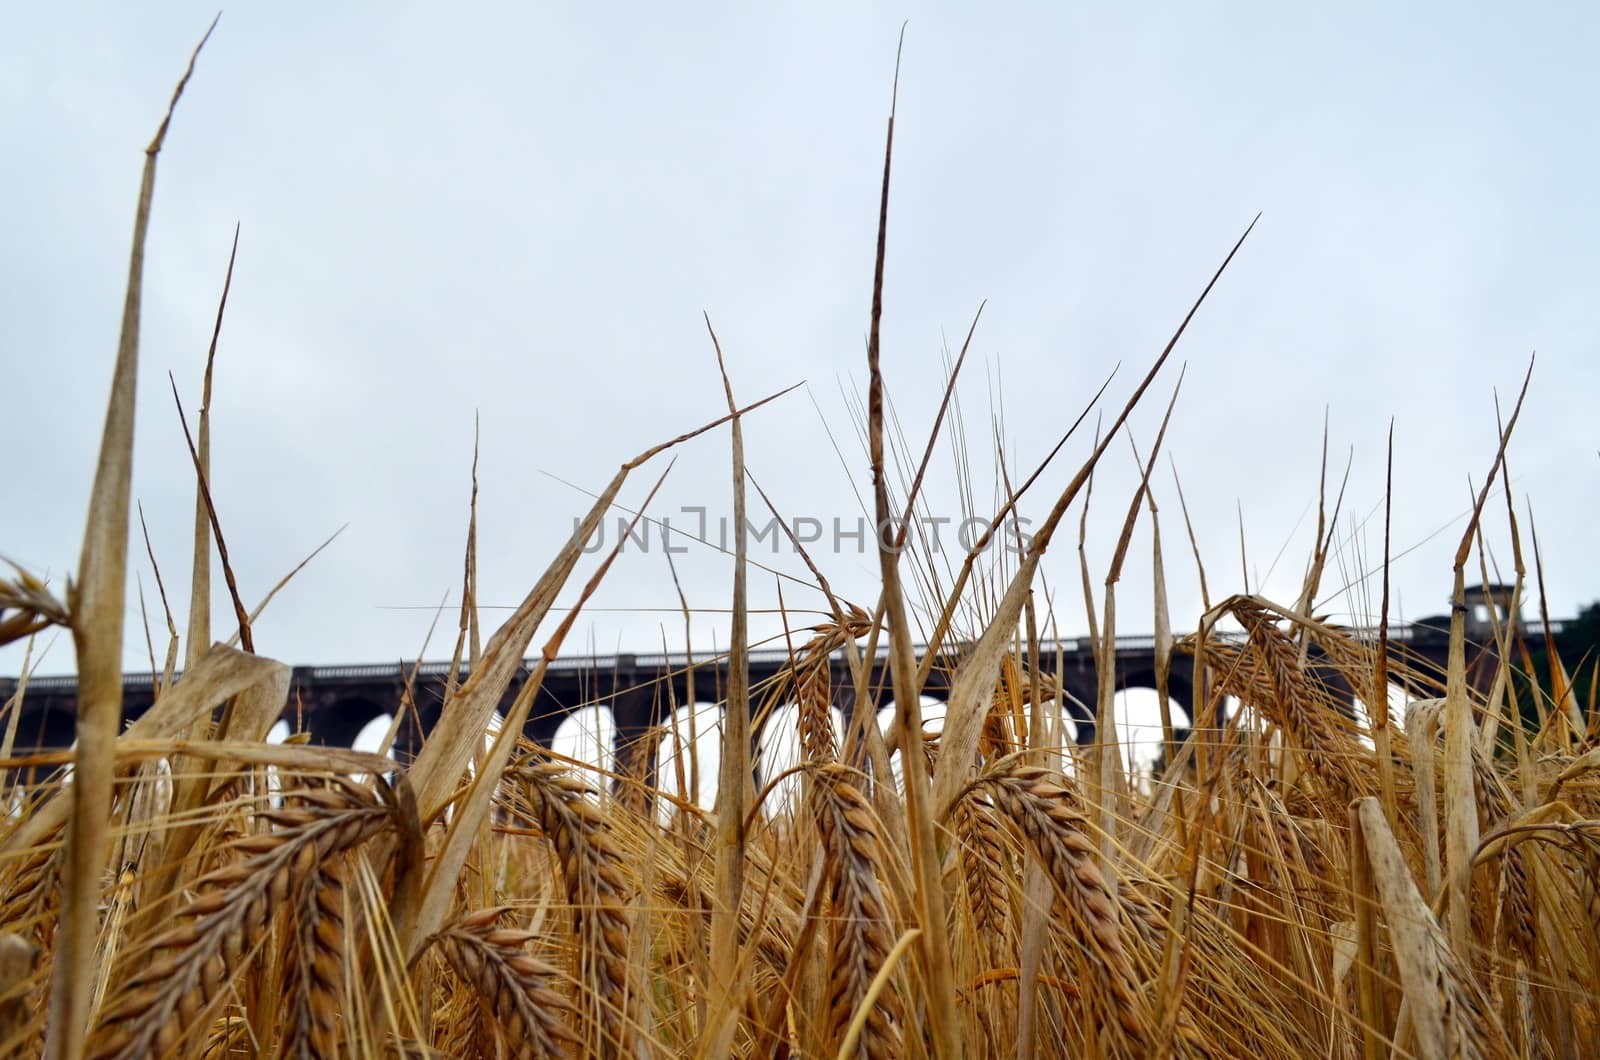 Famous Balcombe train viaduct in Sussex, England.View taken at low angle in a wheat field.